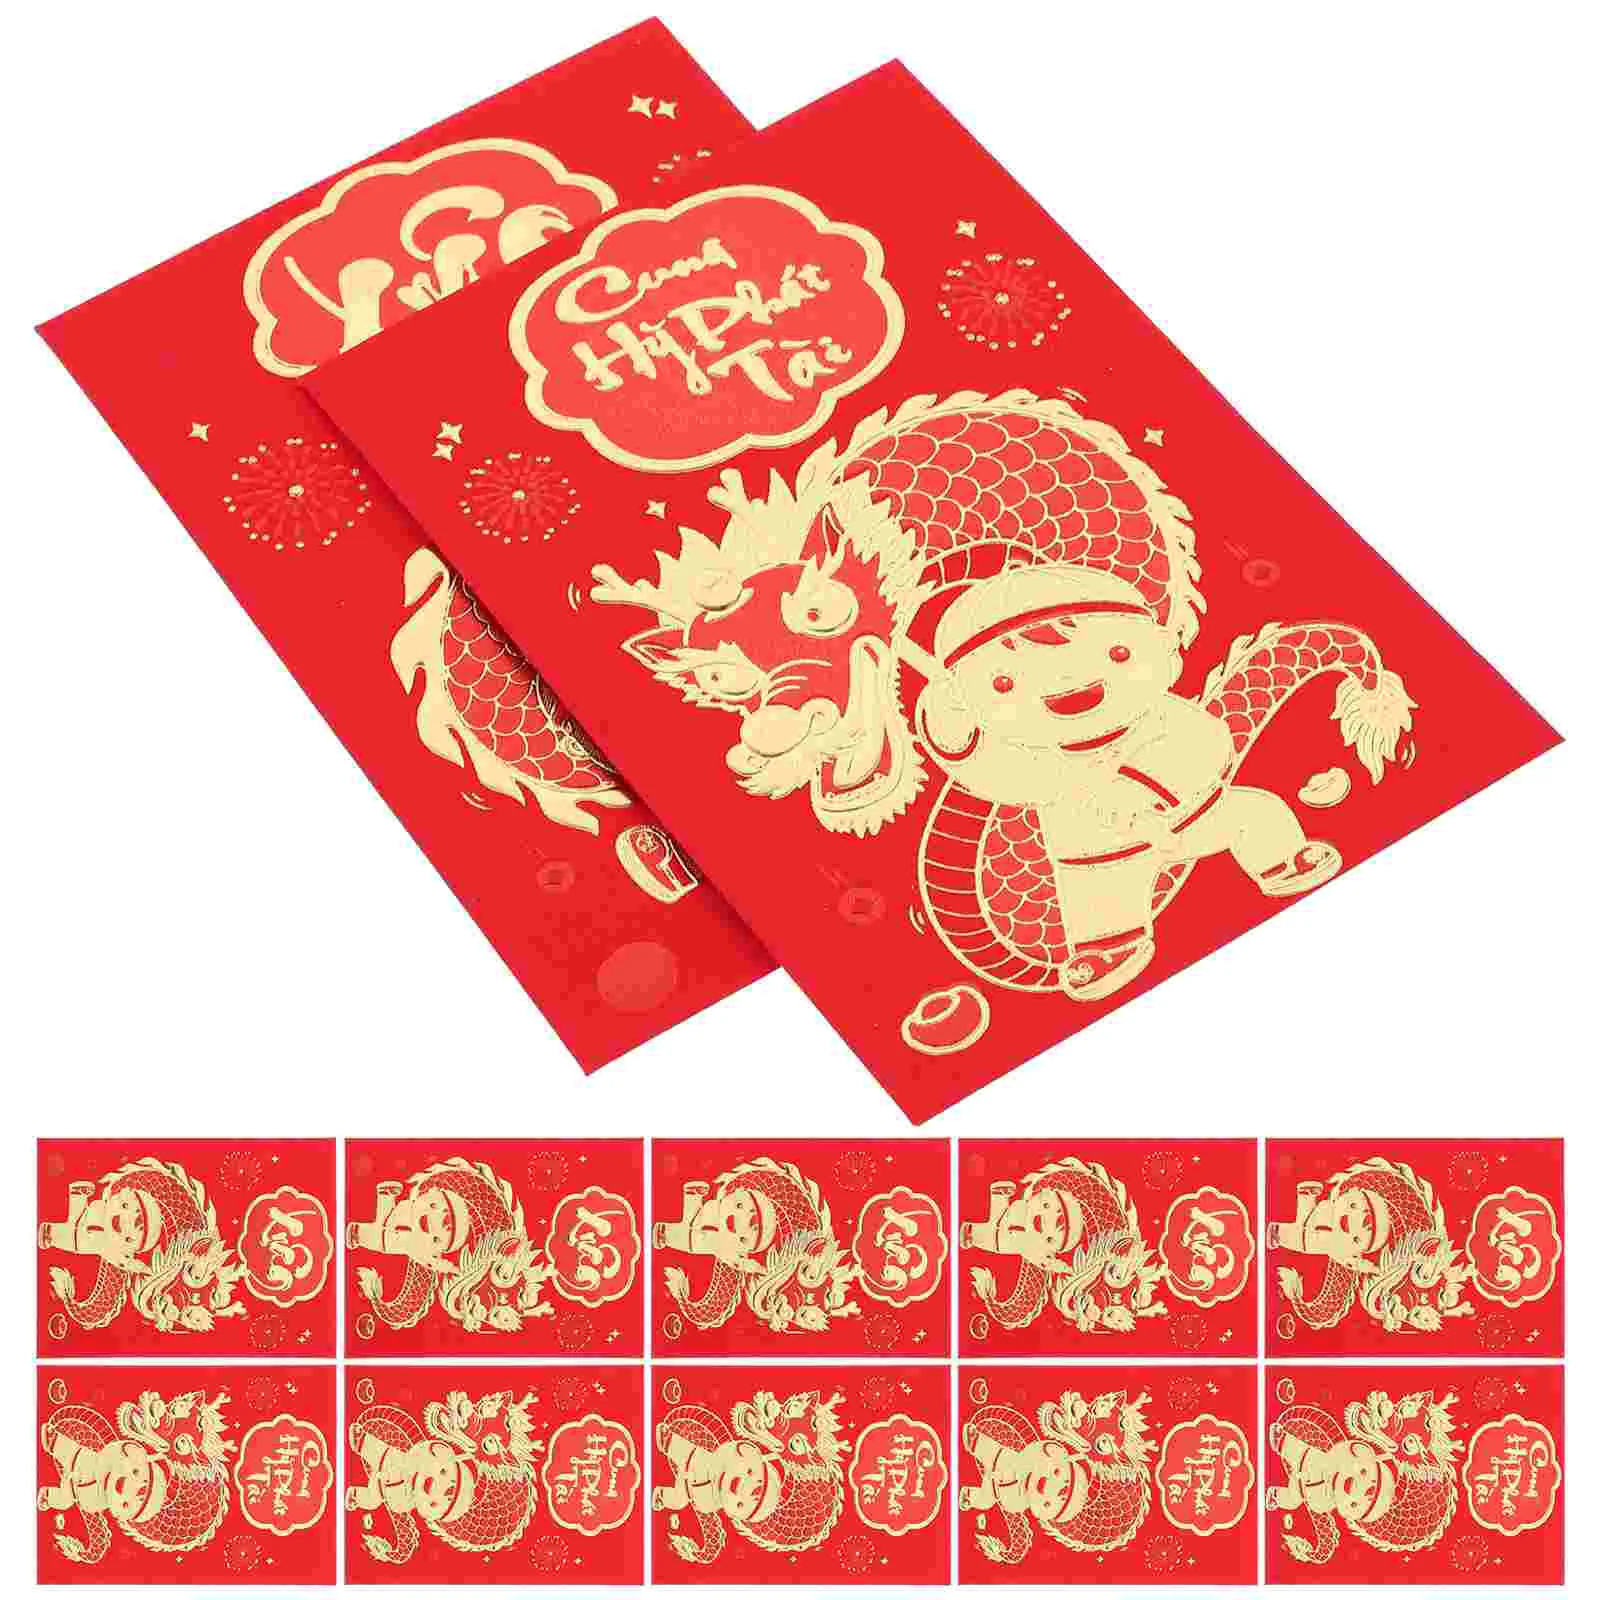 

Money Red Pockets Chinese Lucky Money Envelopes Year Red Envelopes Cash Envelopes Money Bags Random Style